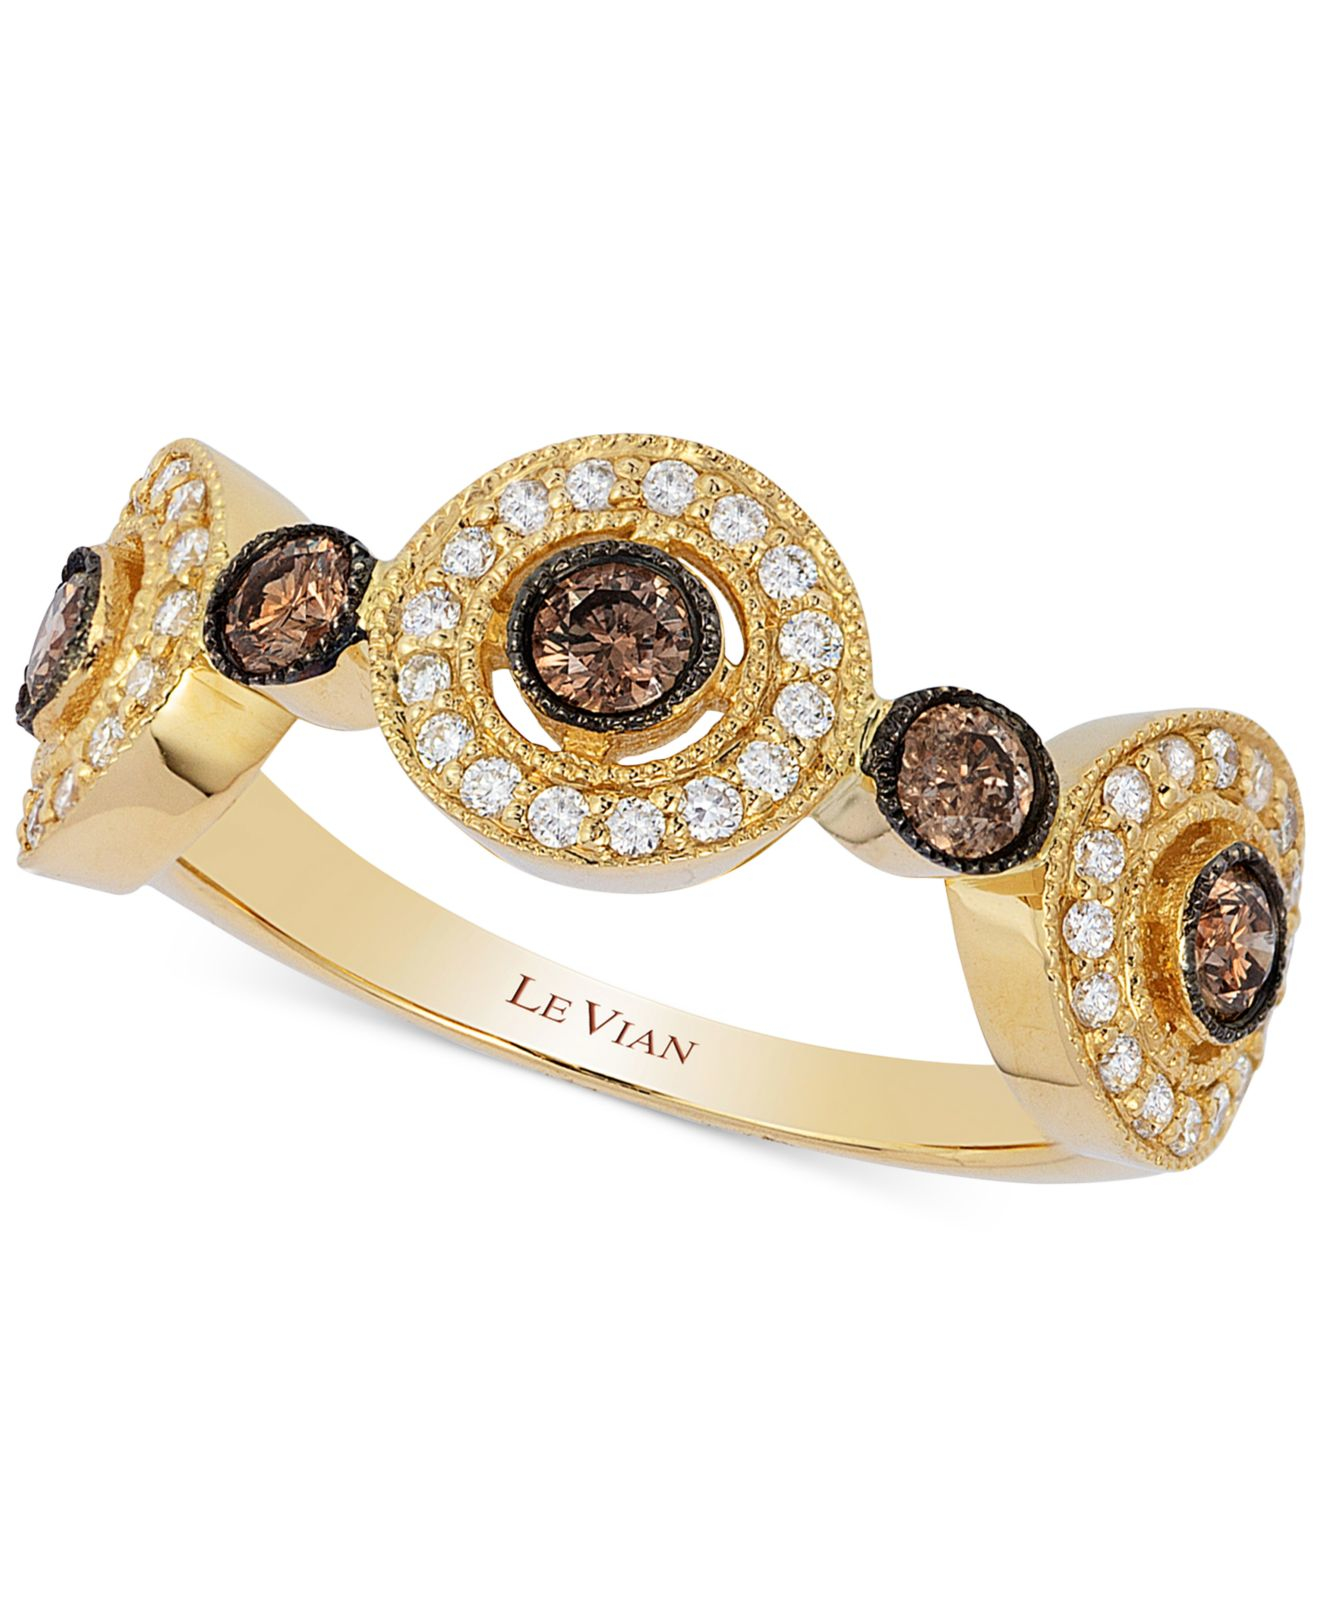 Le vian Chocolatier® Chocolate Deco Estate Gold Diamond (1/2 Ct. T.w.) Ring In 14k Gold in Gold